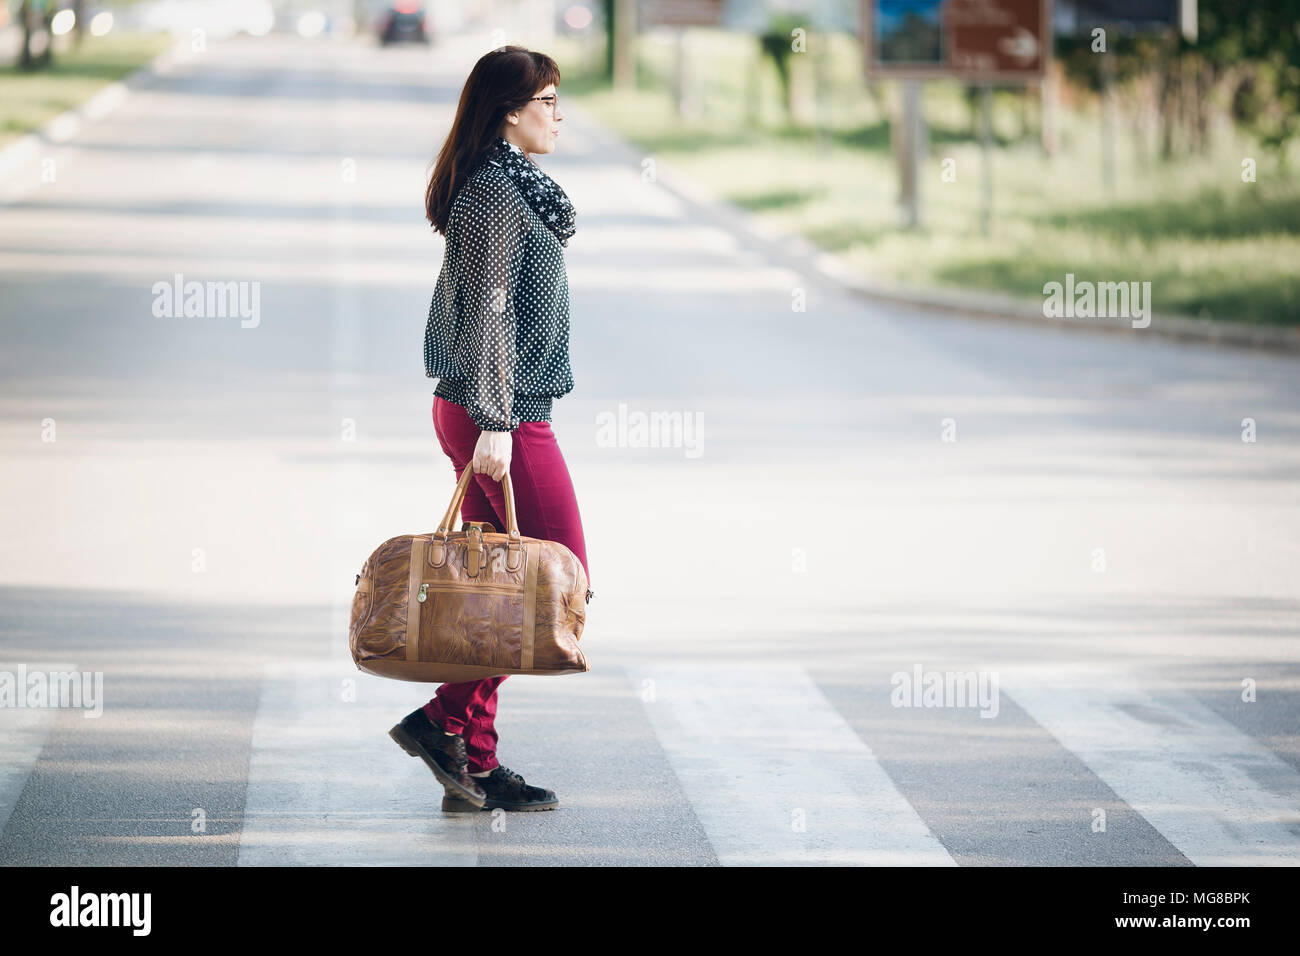 The woman with brown leather bag crosses a pedestrian crossing Stock Photo